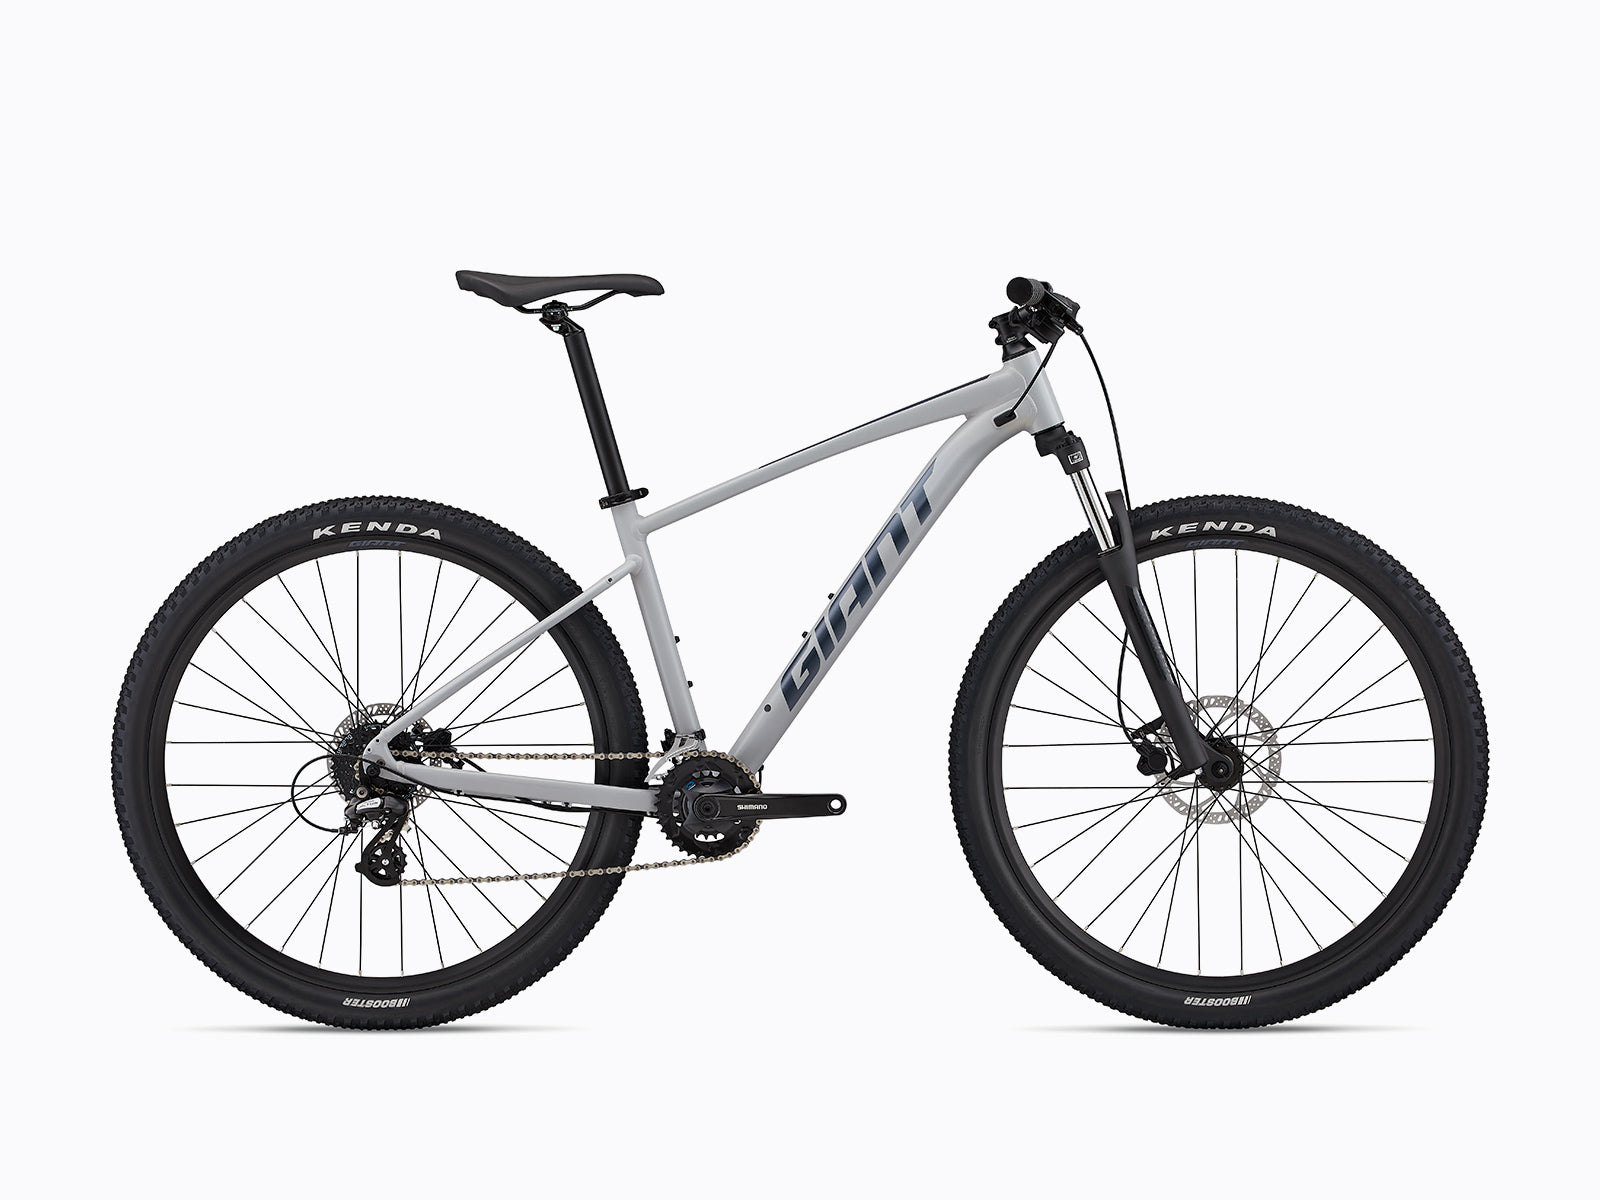 image features a giant talon, a versatile mountain bike that can be used as a city bike and a fitness bike